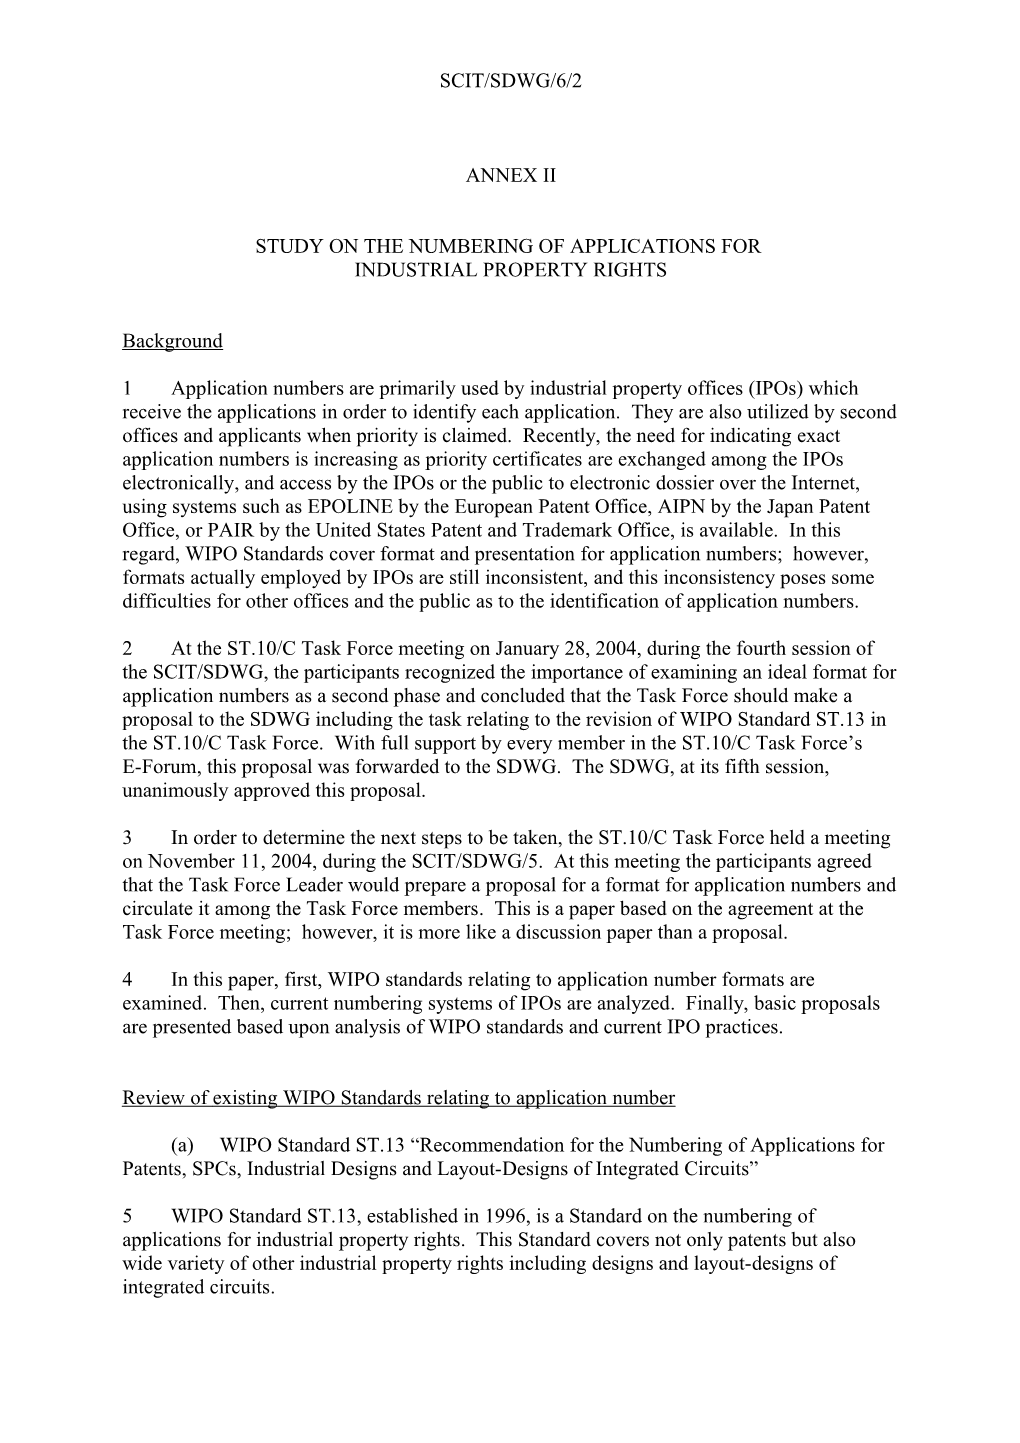 SCIT/SDWG/6/2: Revision of WIPO Standard ST.10/C (Annex 2)